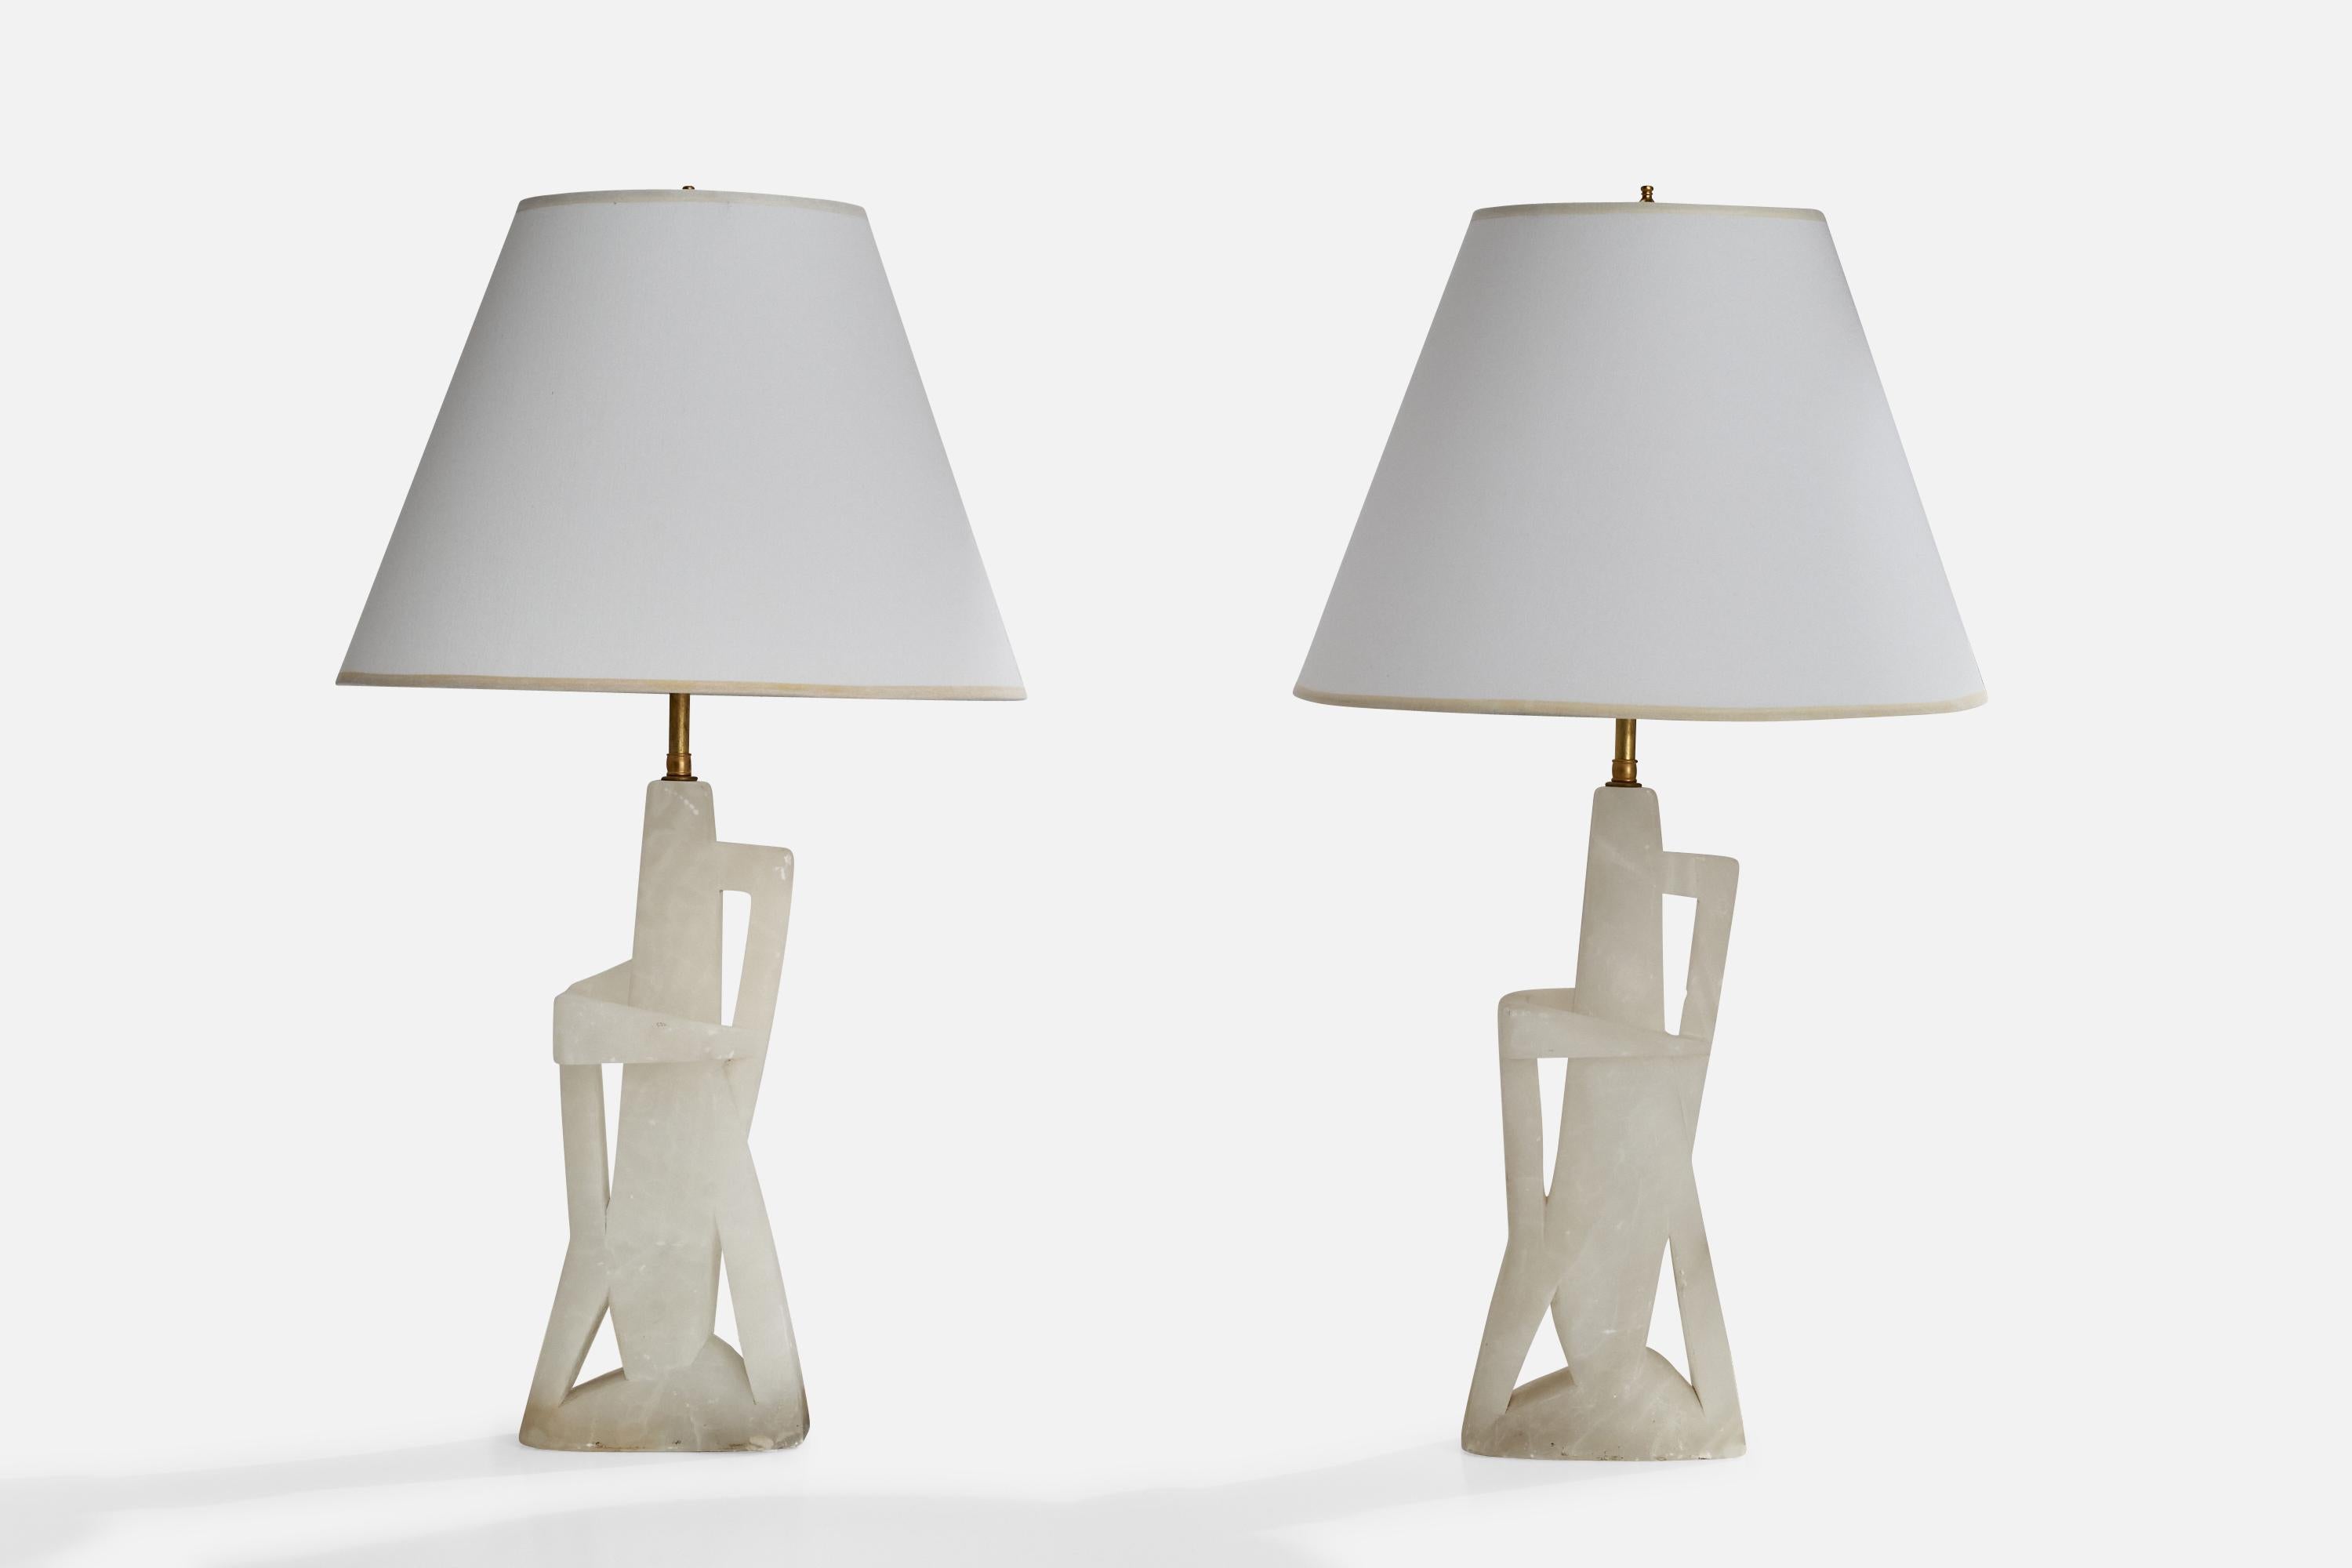 A pair of carved alabaster, white fabric and brass table lamps designed by Maurizio Tempestini, Italy, c. 1965.

Overall Dimensions (inches): 29” H x 16” D
Stated dimensions include shade.
Bulb Specifications: E-26 Bulb
Number of Sockets: 4
All